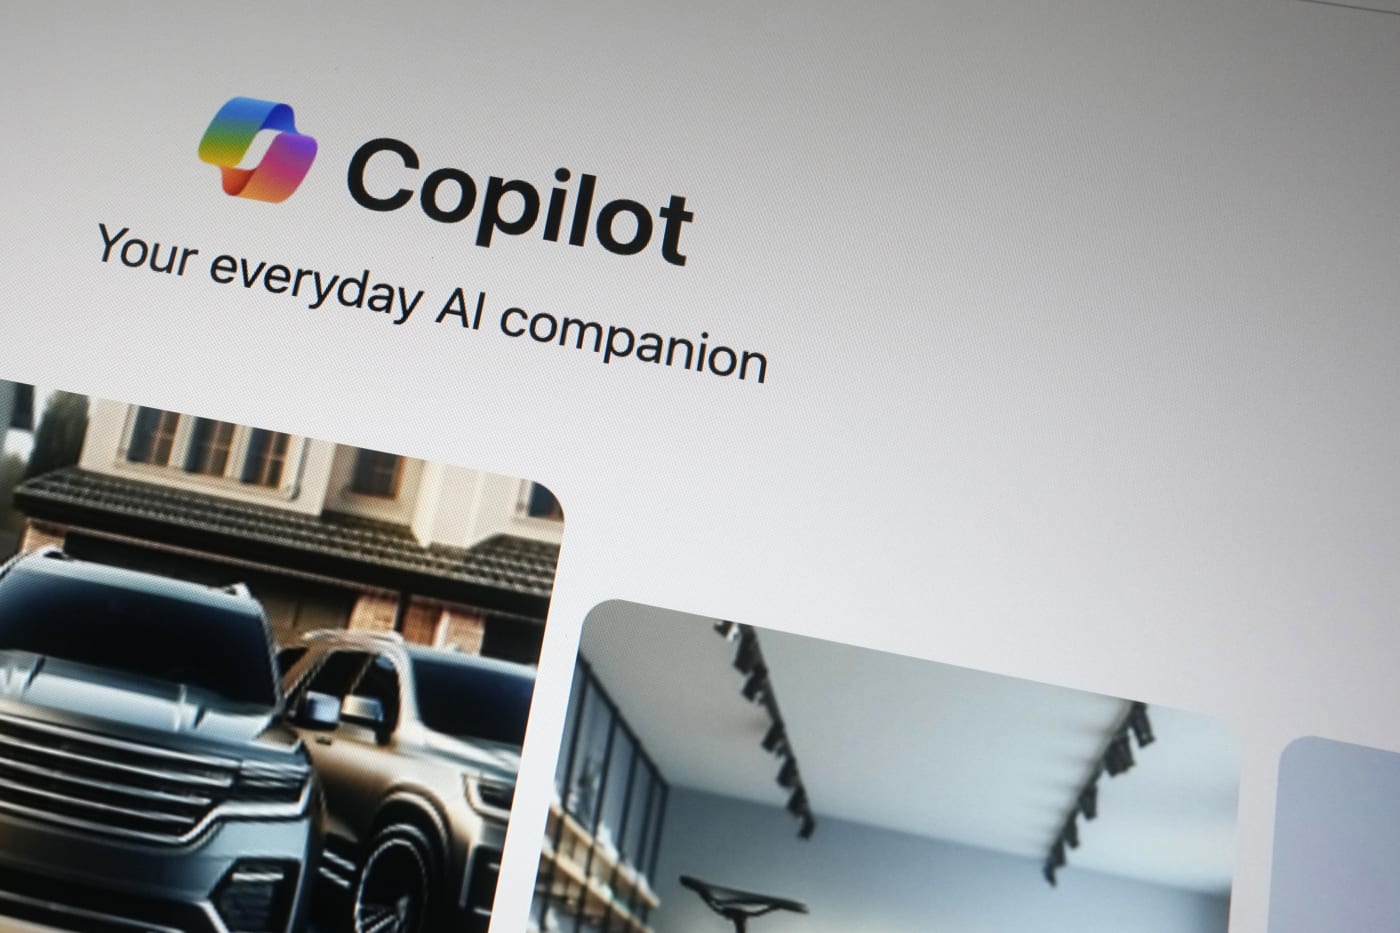 Microsoft unveils Copilot+ PCs with generative AI capabilities baked in